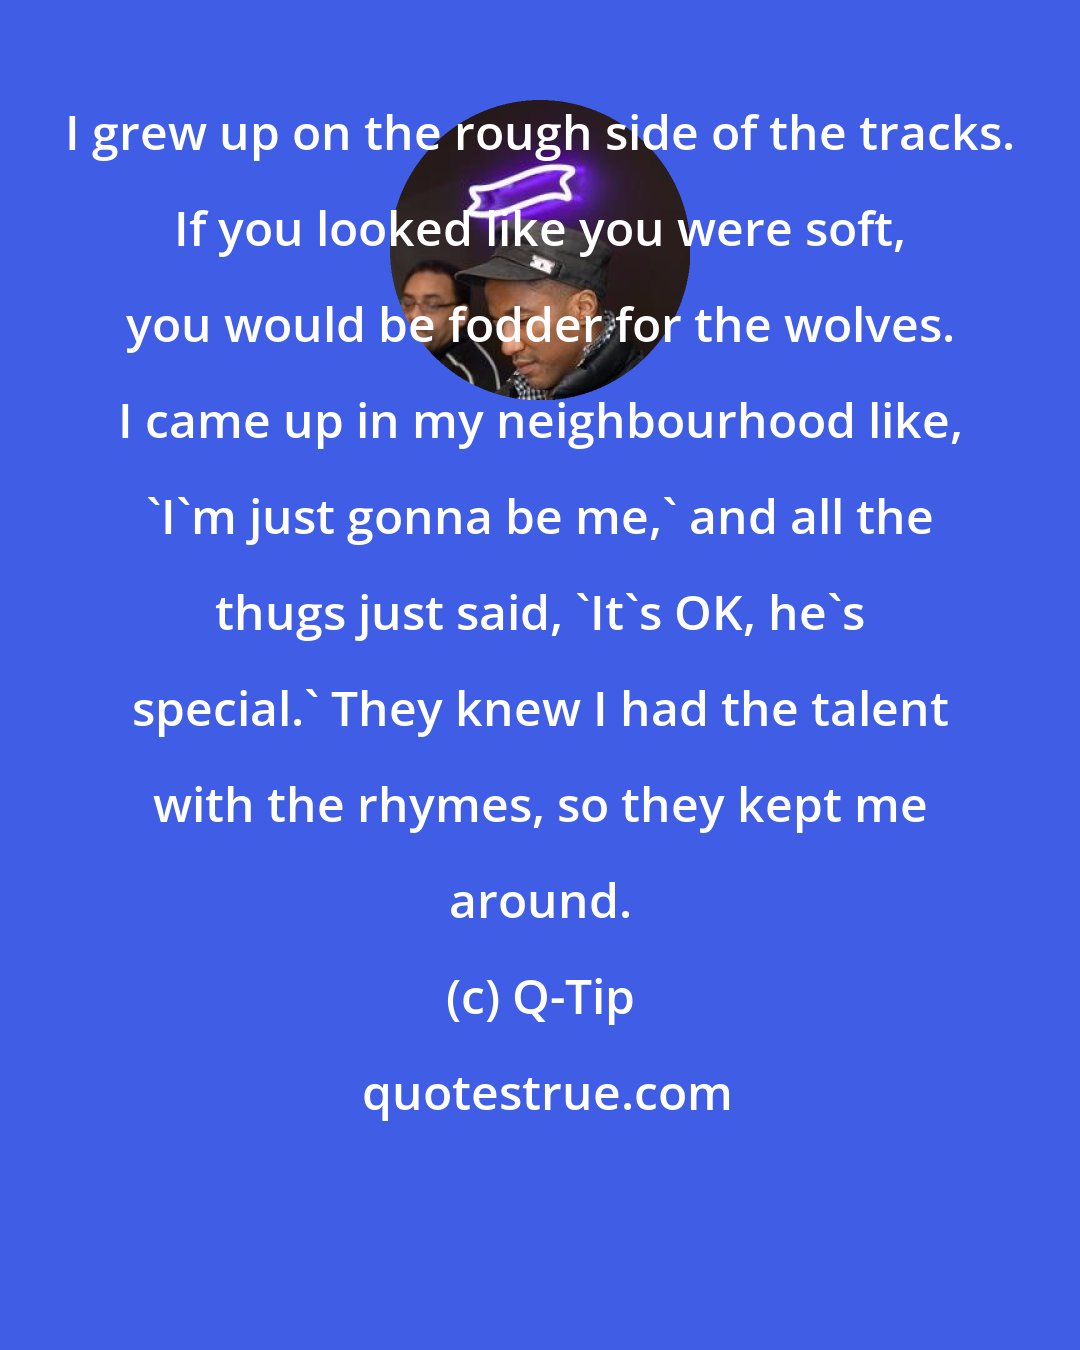 Q-Tip: I grew up on the rough side of the tracks. If you looked like you were soft, you would be fodder for the wolves. I came up in my neighbourhood like, 'I'm just gonna be me,' and all the thugs just said, 'It's OK, he's special.' They knew I had the talent with the rhymes, so they kept me around.